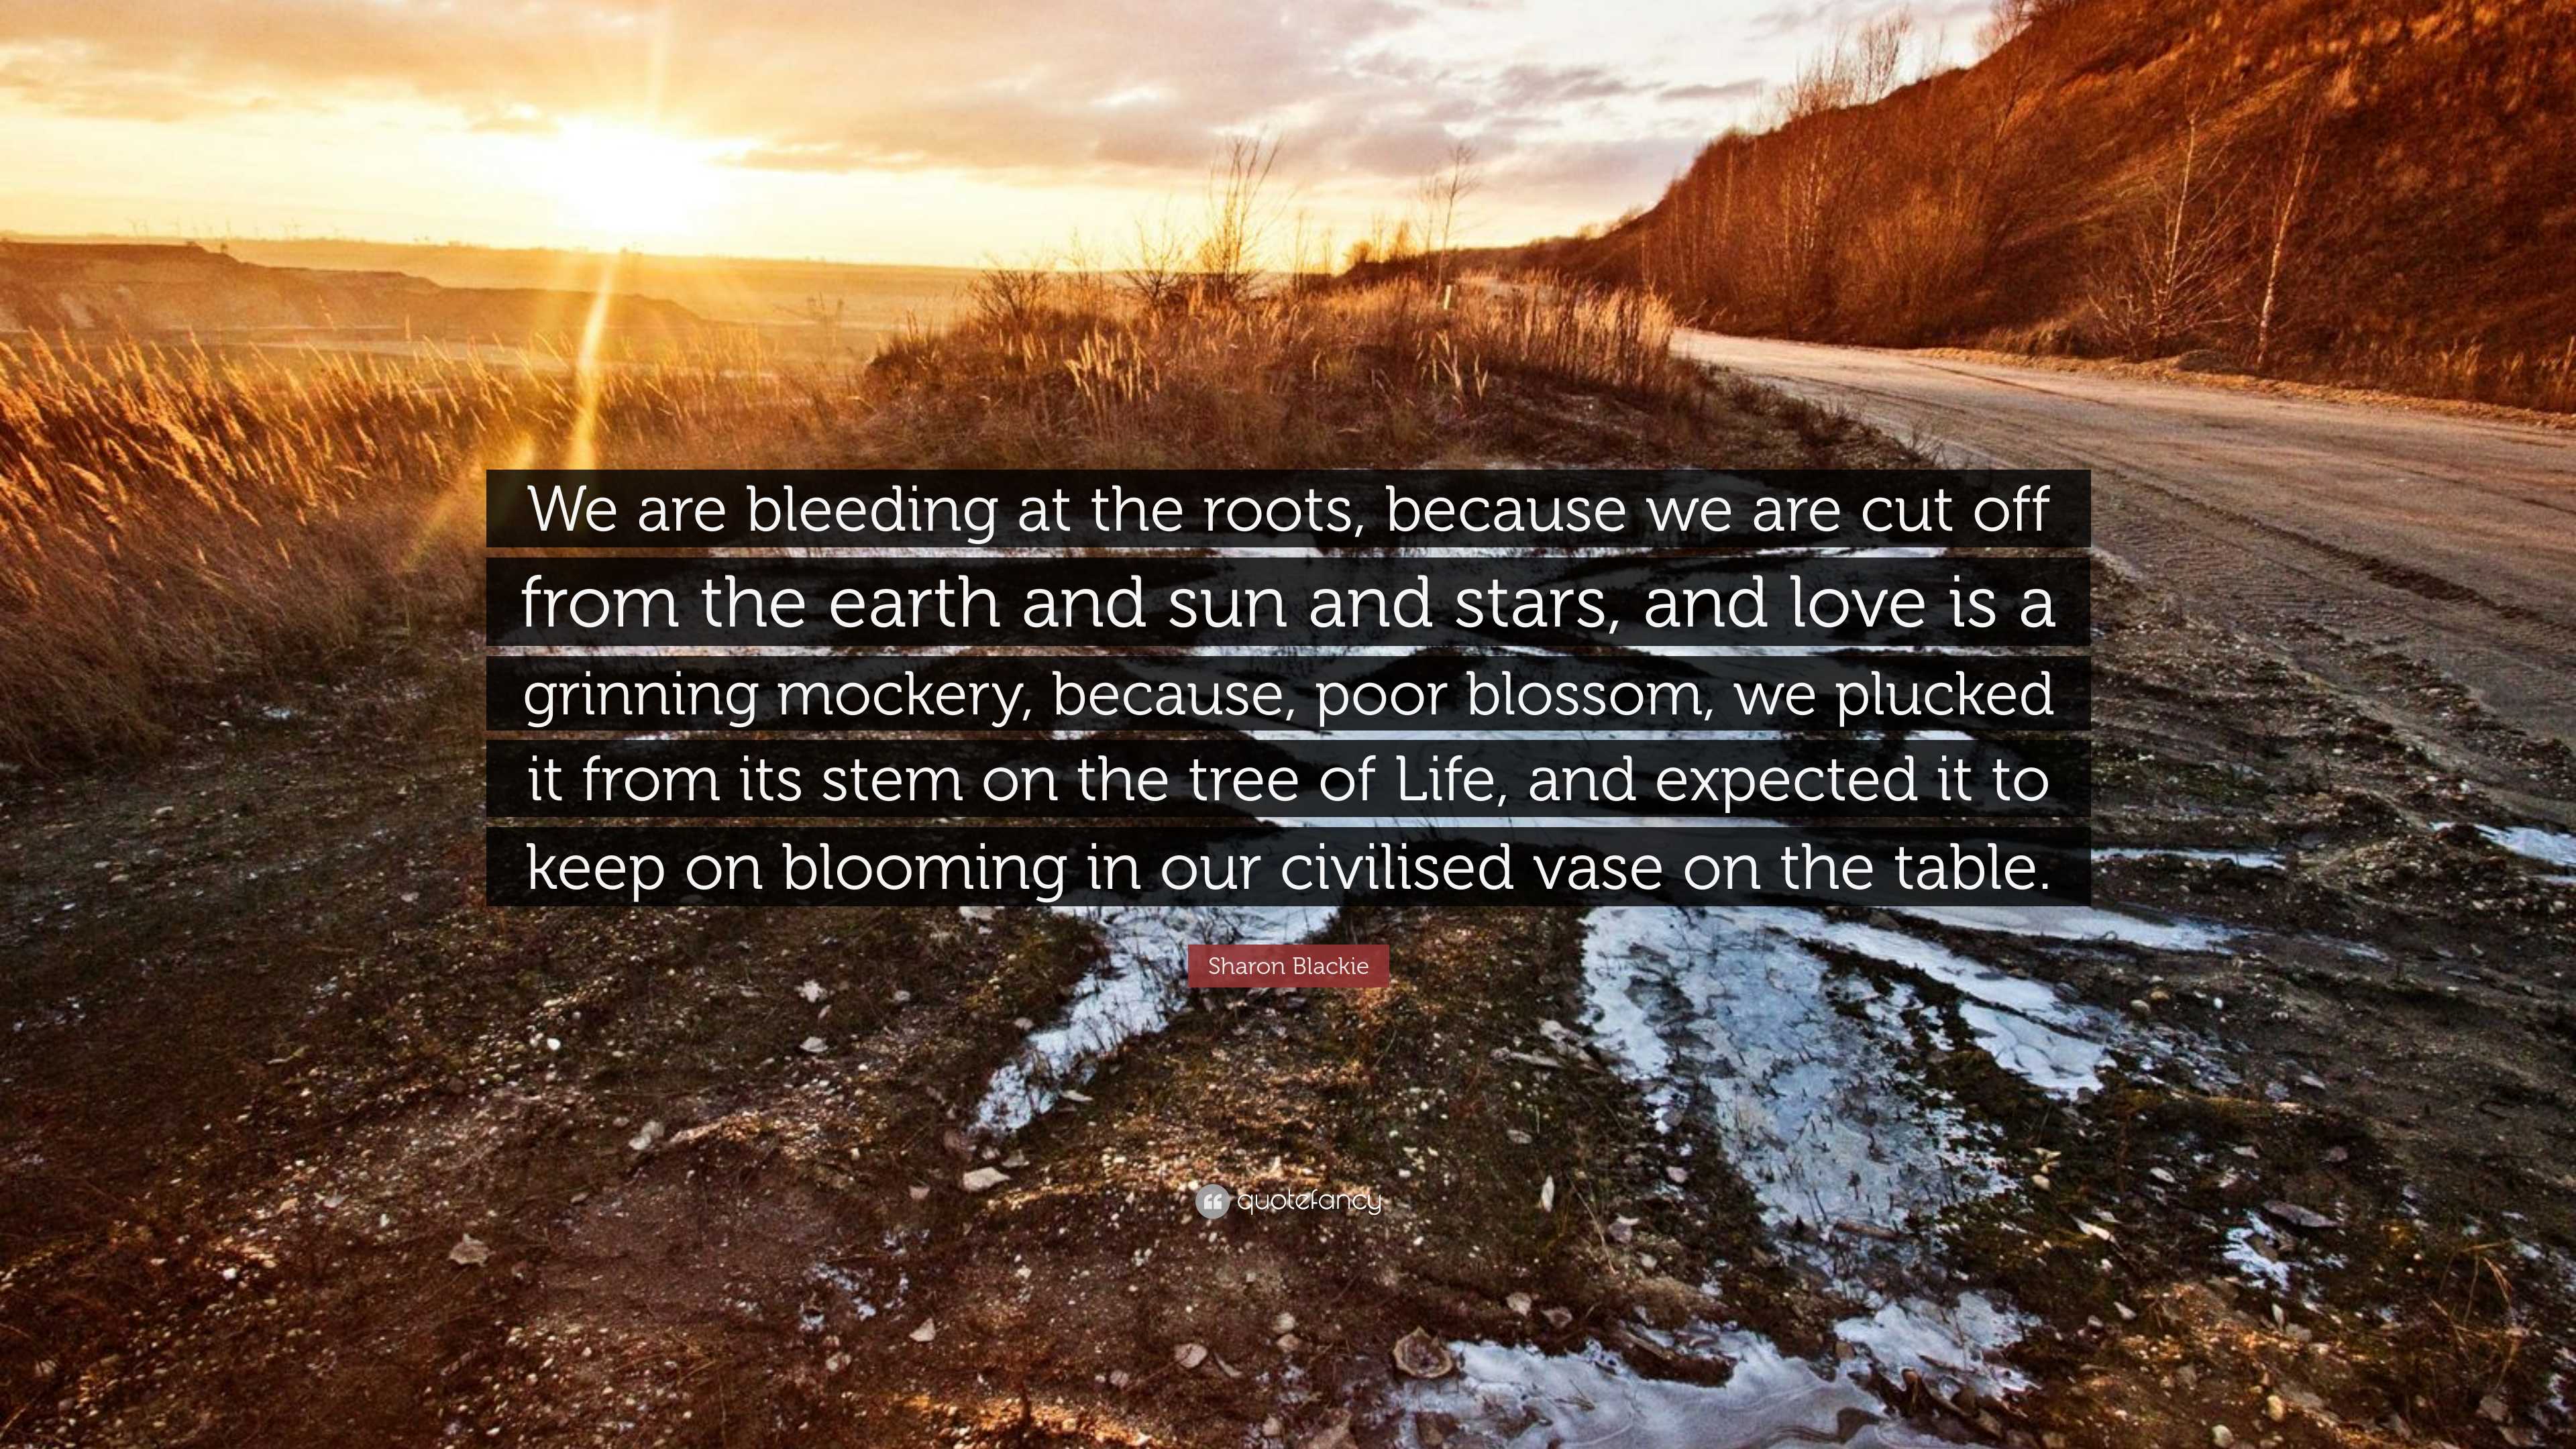 Sharon Blackie Quote: “We are bleeding at the roots, because we are cut off  from the earth and sun and stars, and love is a grinning mockery, b”